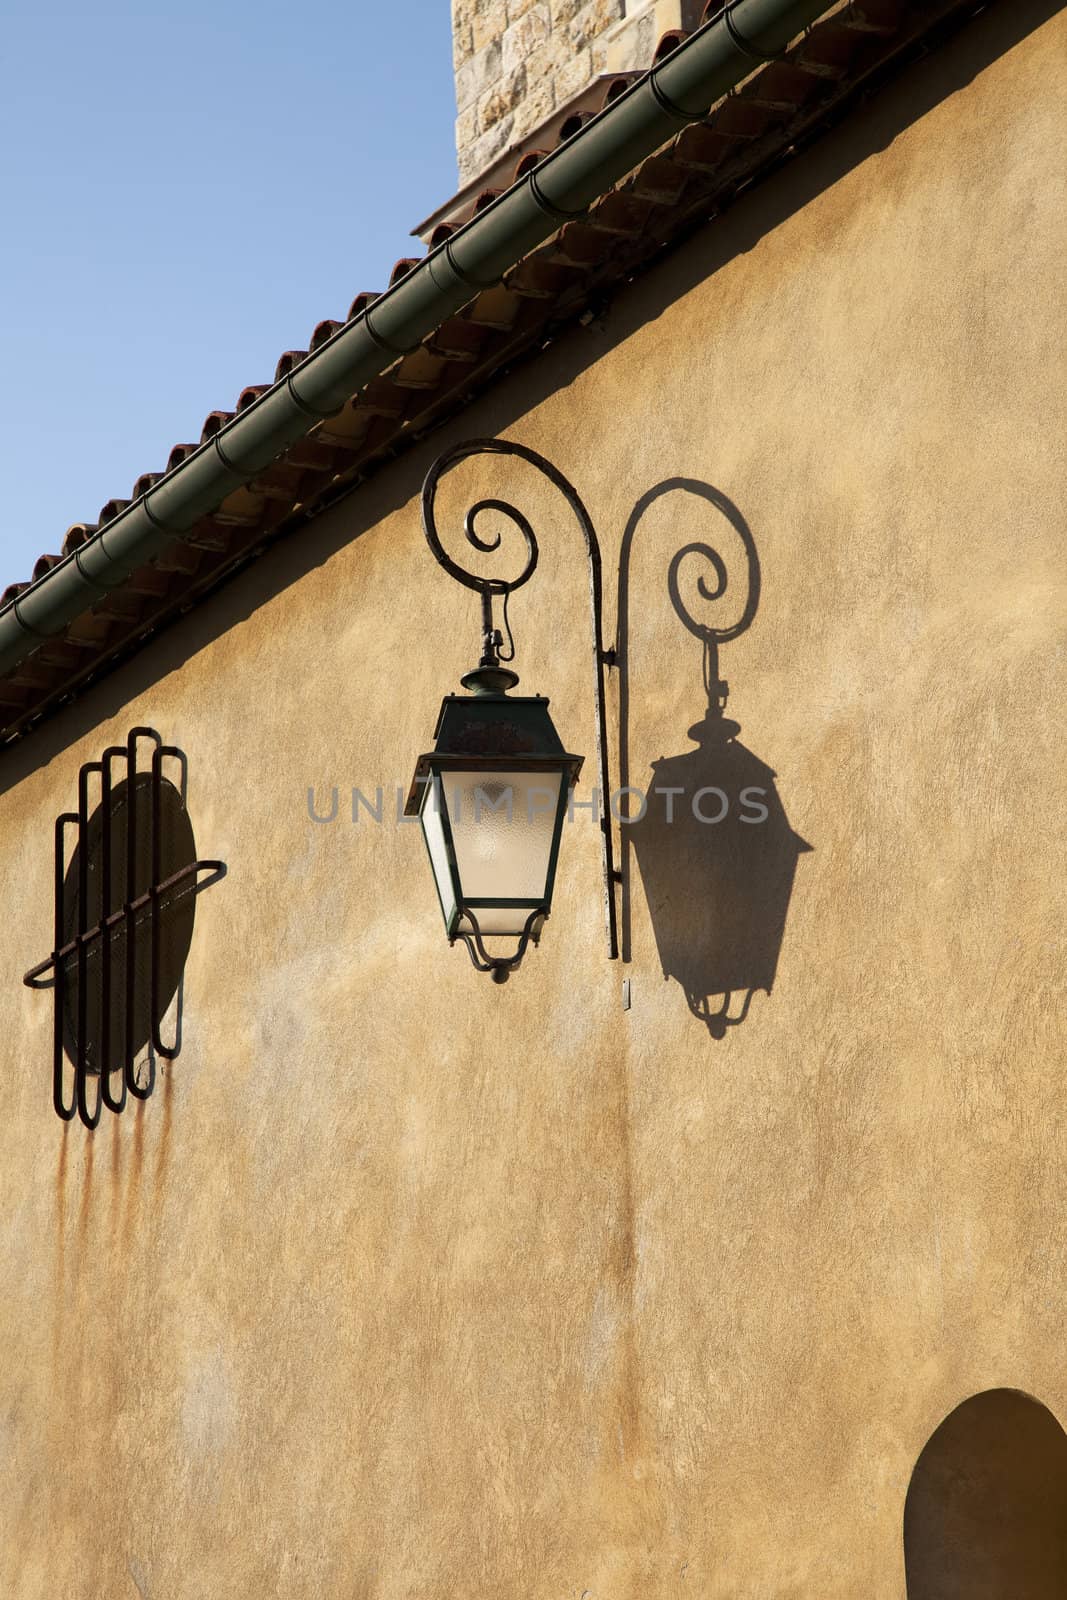 Stucco building and old lantern in sunlight with shadow.